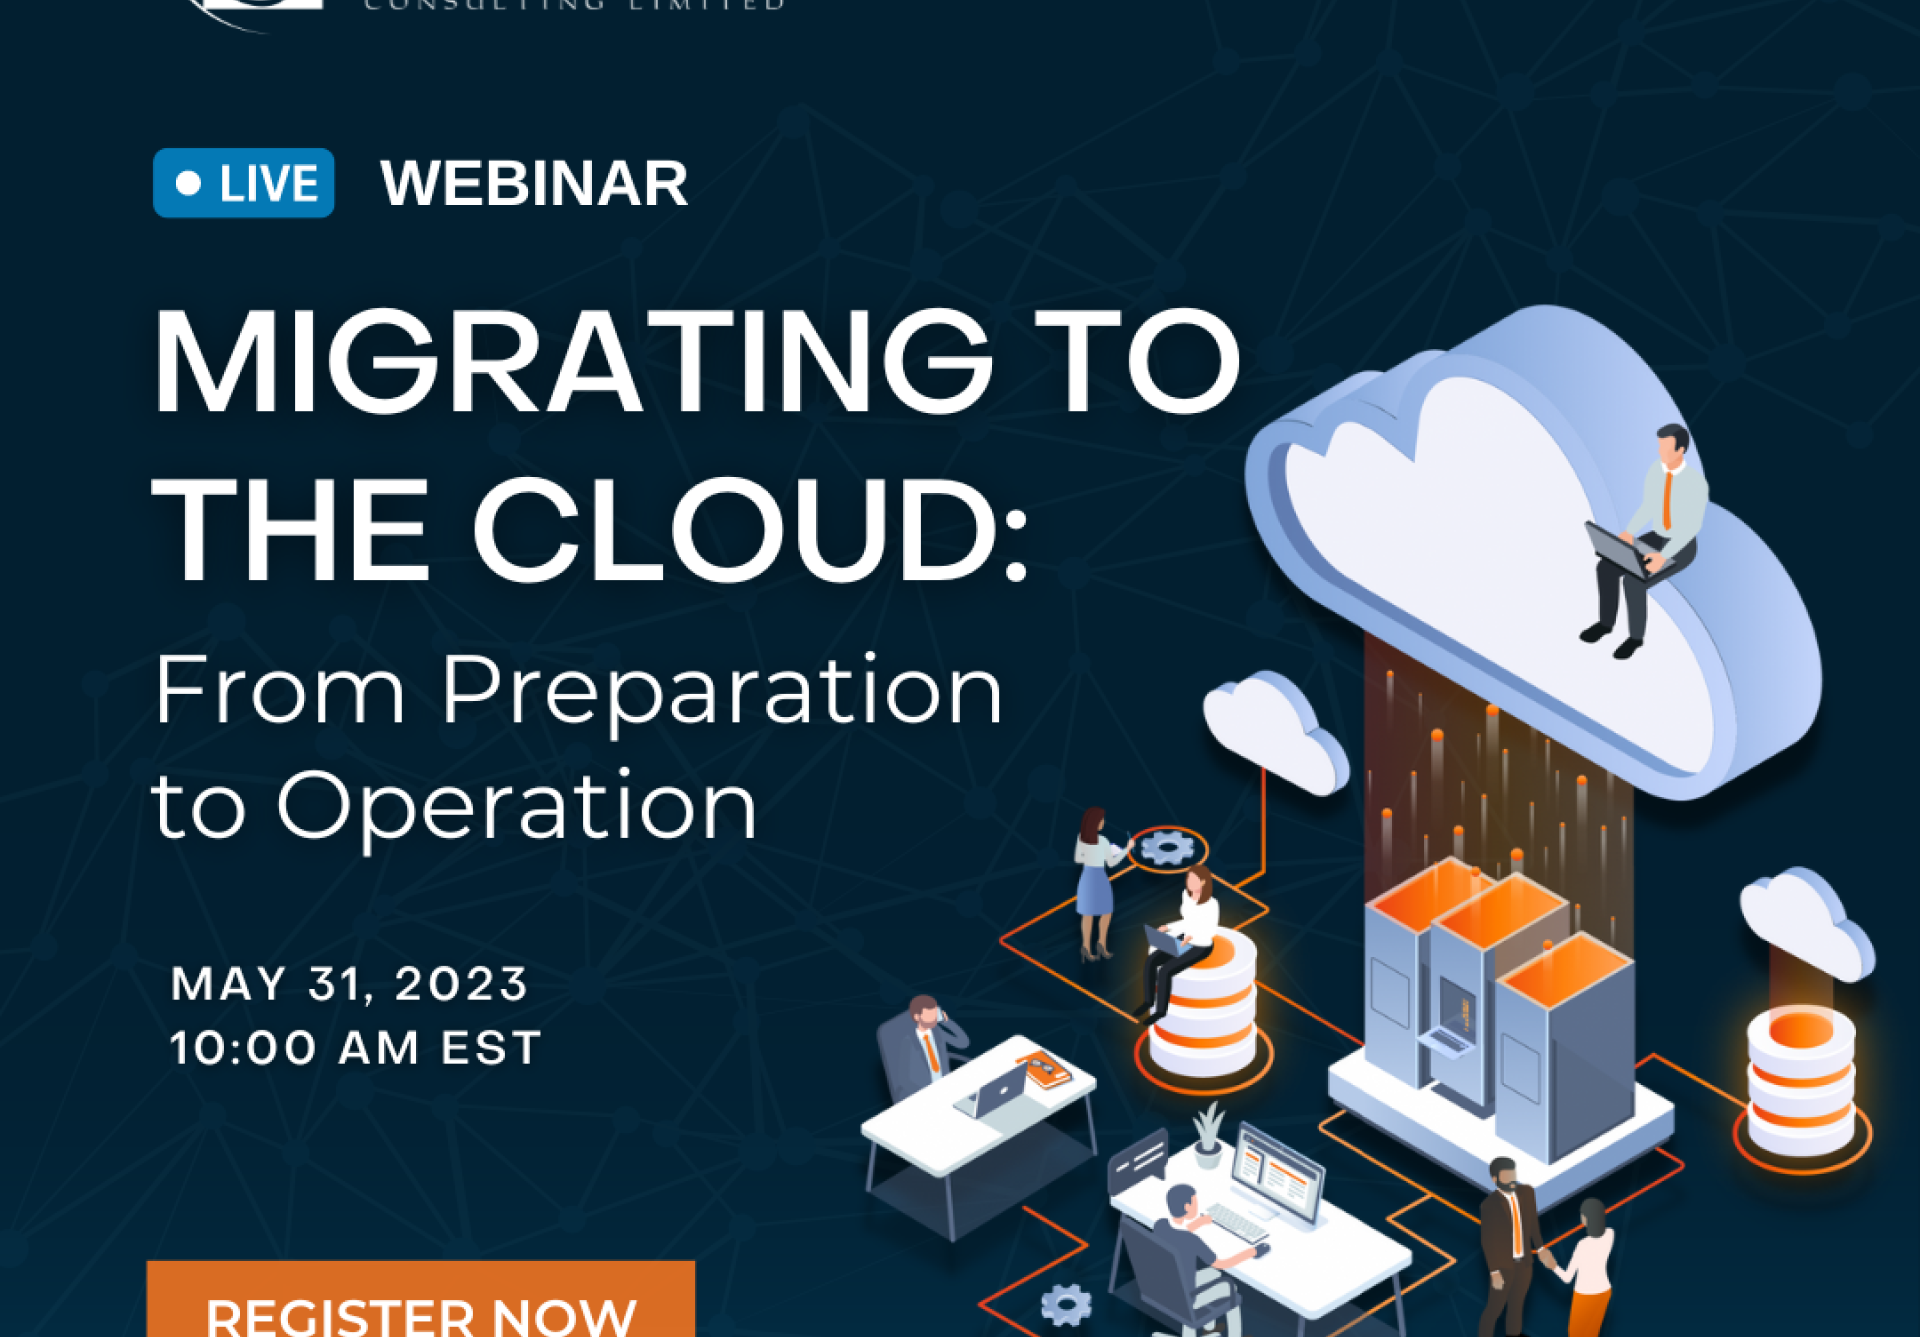 Migrating to the Cloud - From preparation to Operation